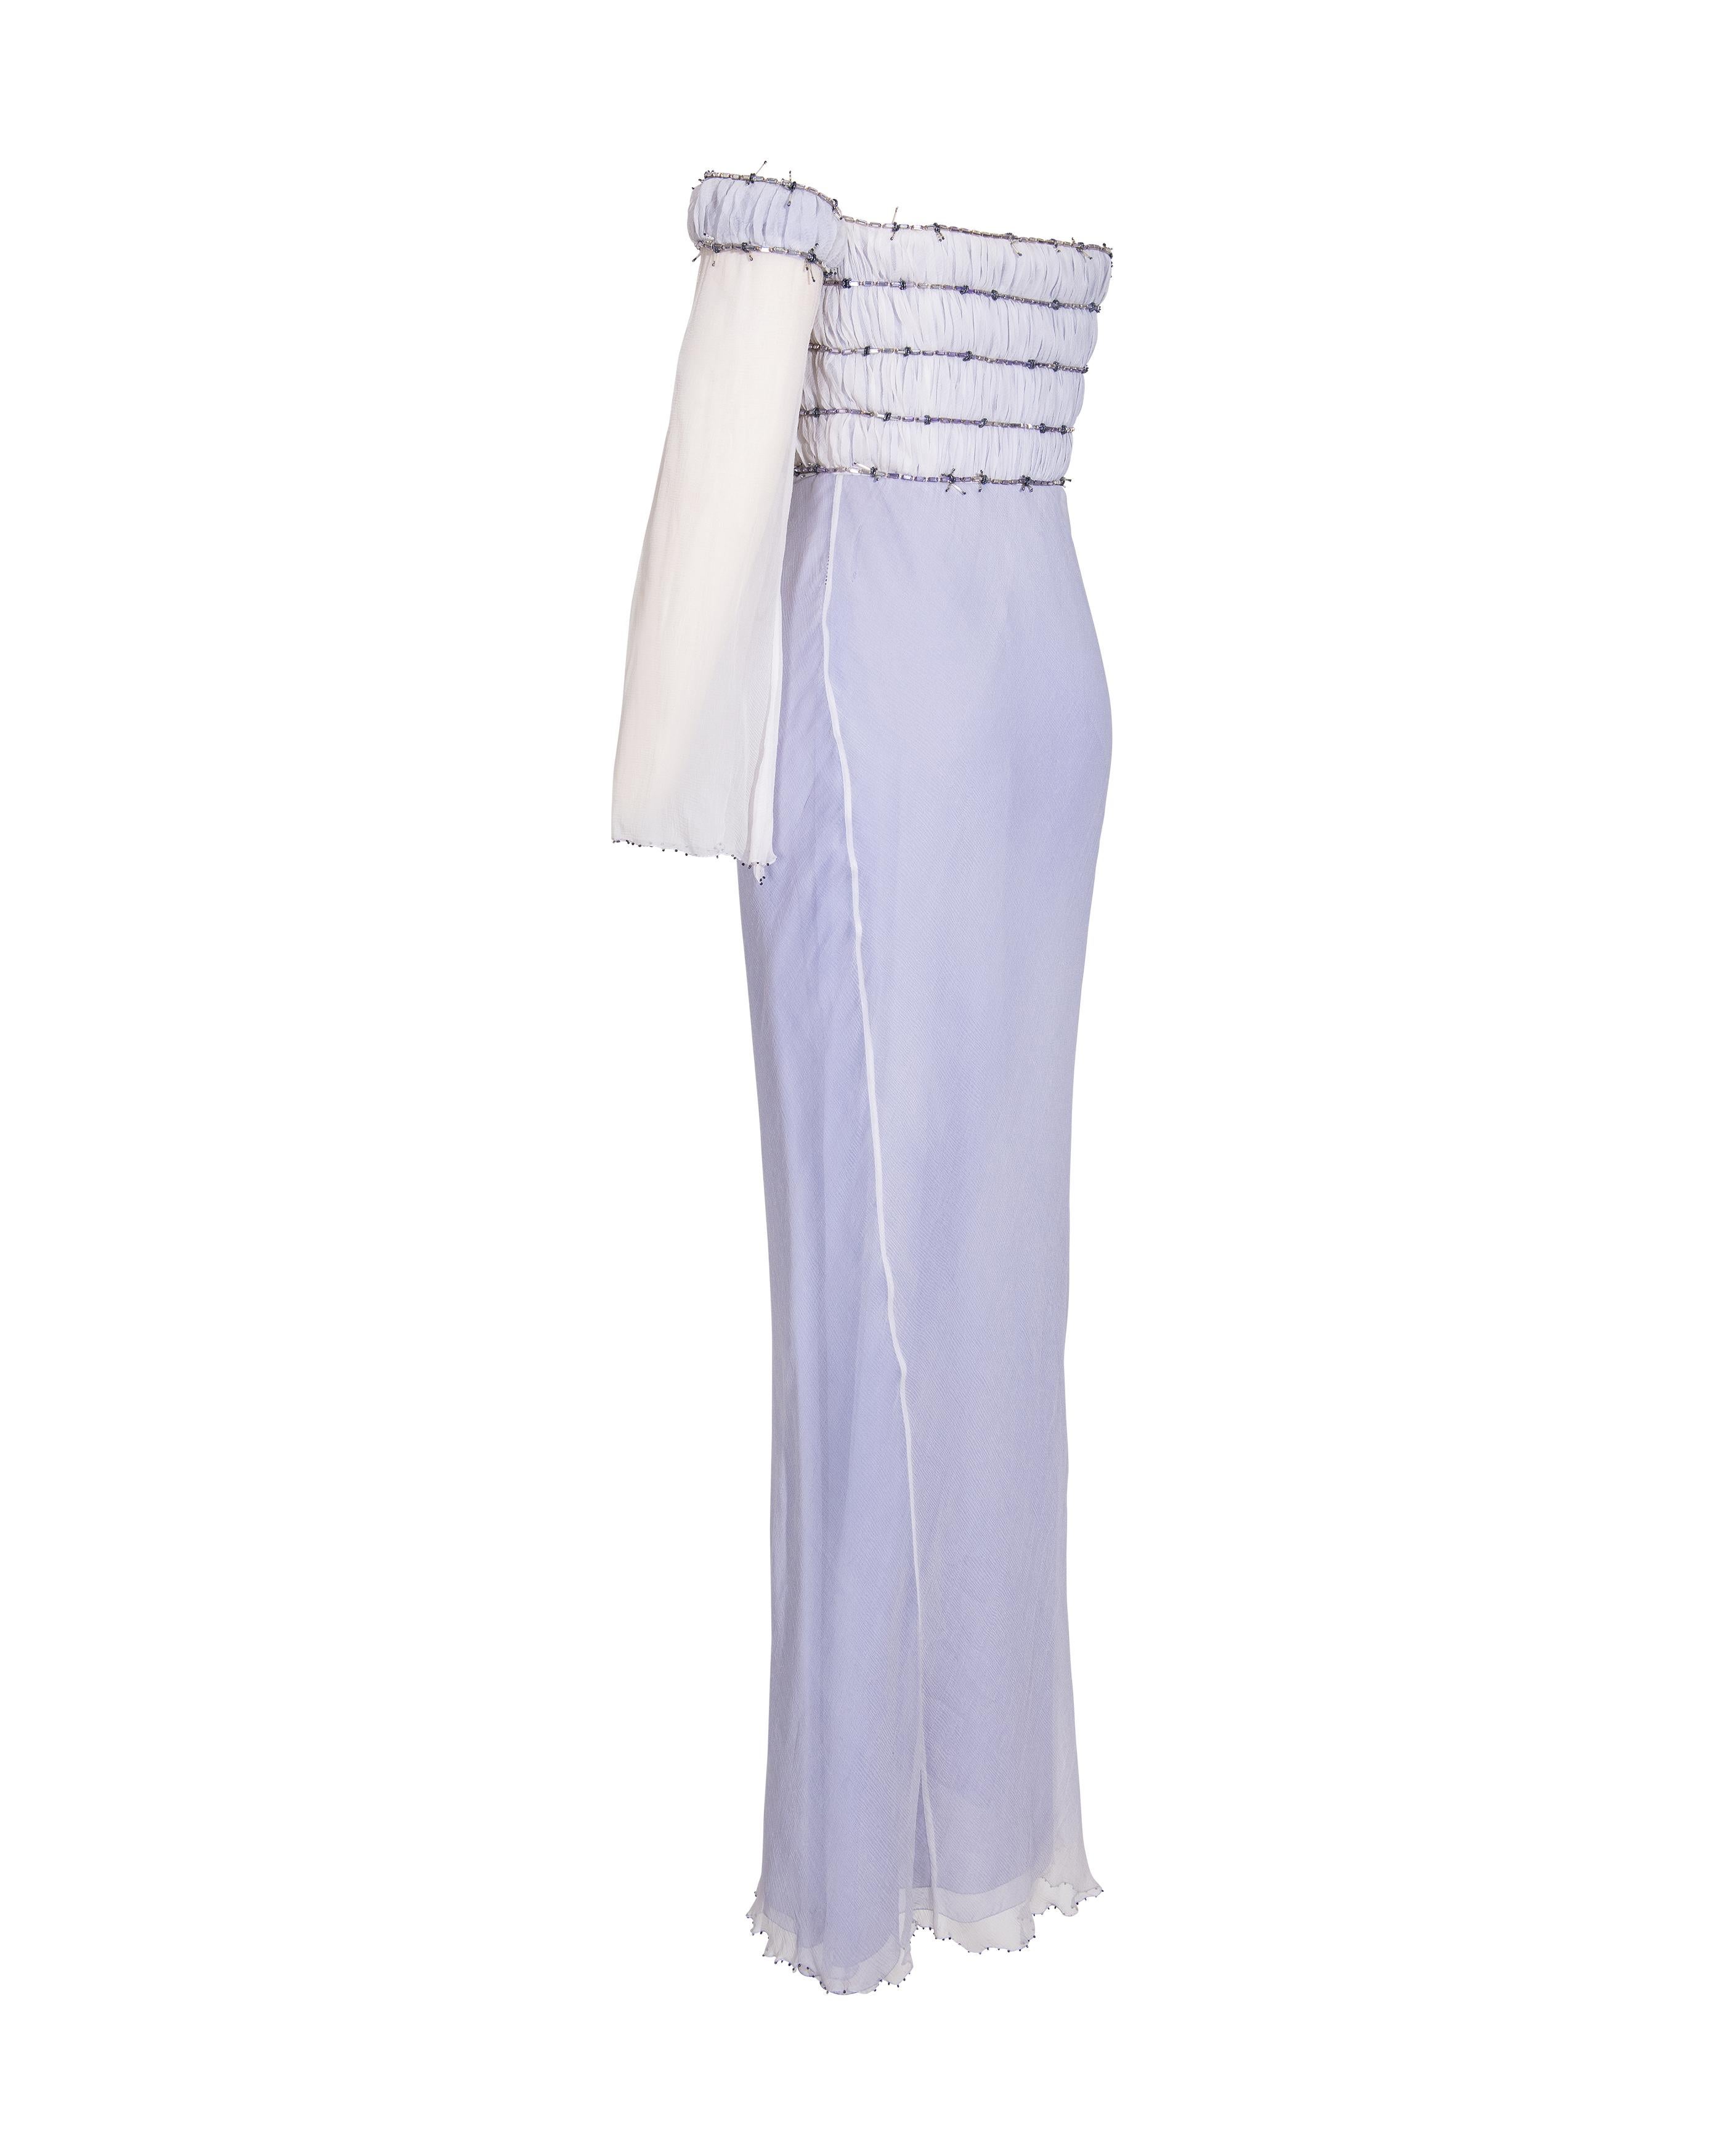 A/W 1998 Gianni Versace Lilac Strapless One-Shoulder 'Barbed Wire' Gown 1